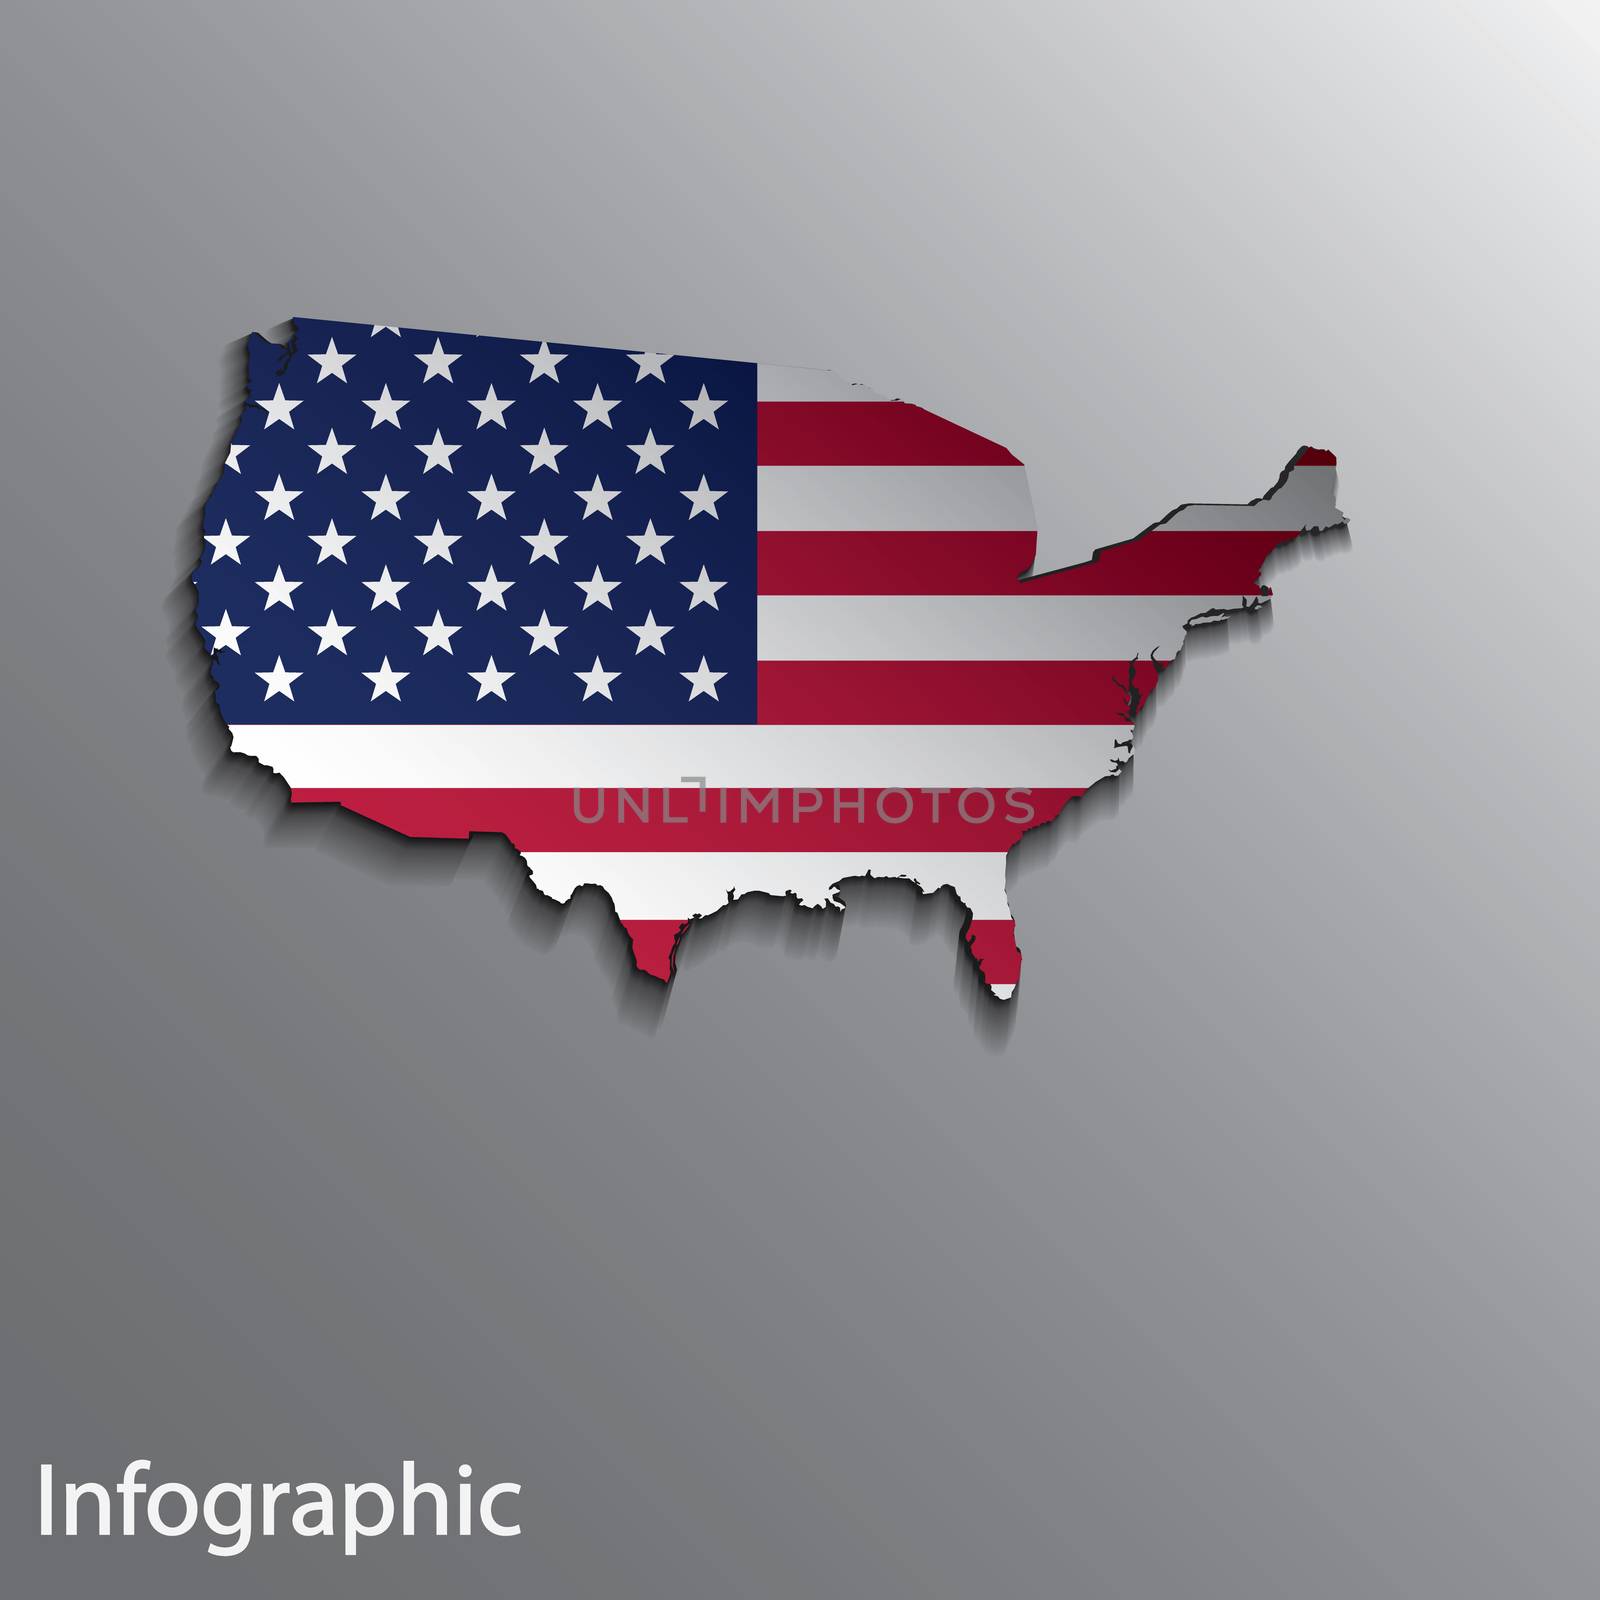 Country of United States of America by thampapon